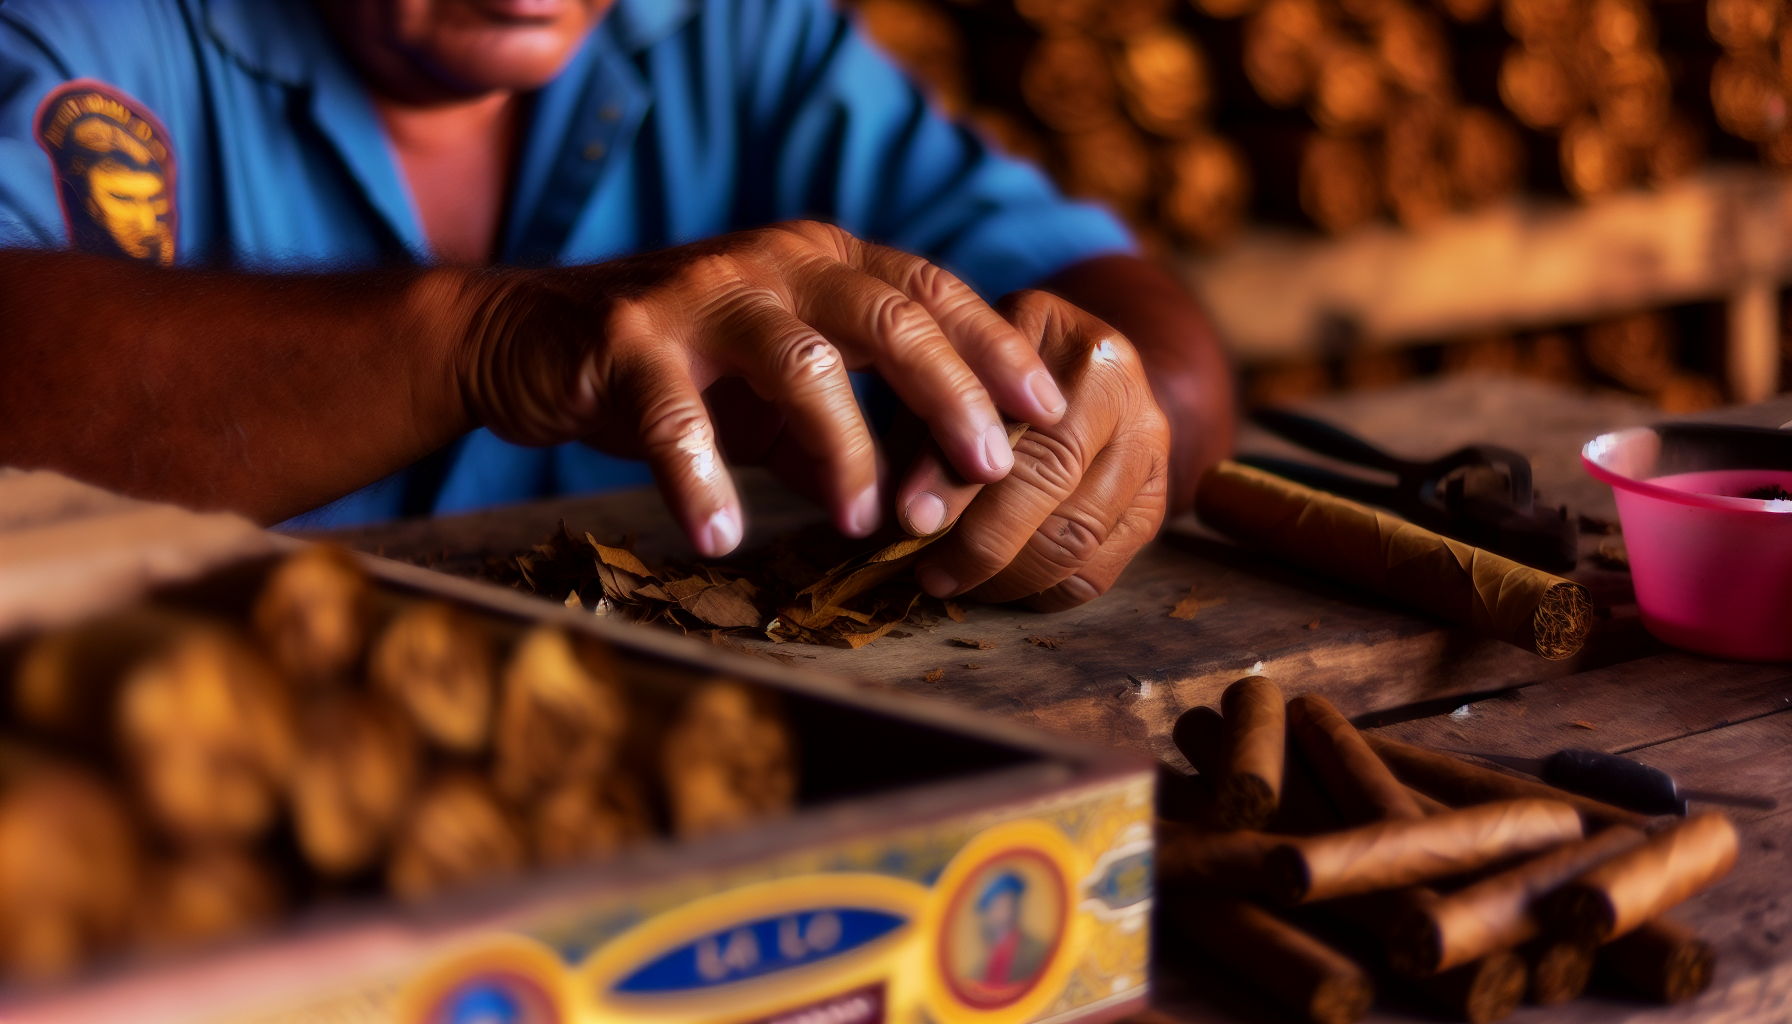 Close-up of hands skillfully rolling cigars with traditional Cuban rolling techniques